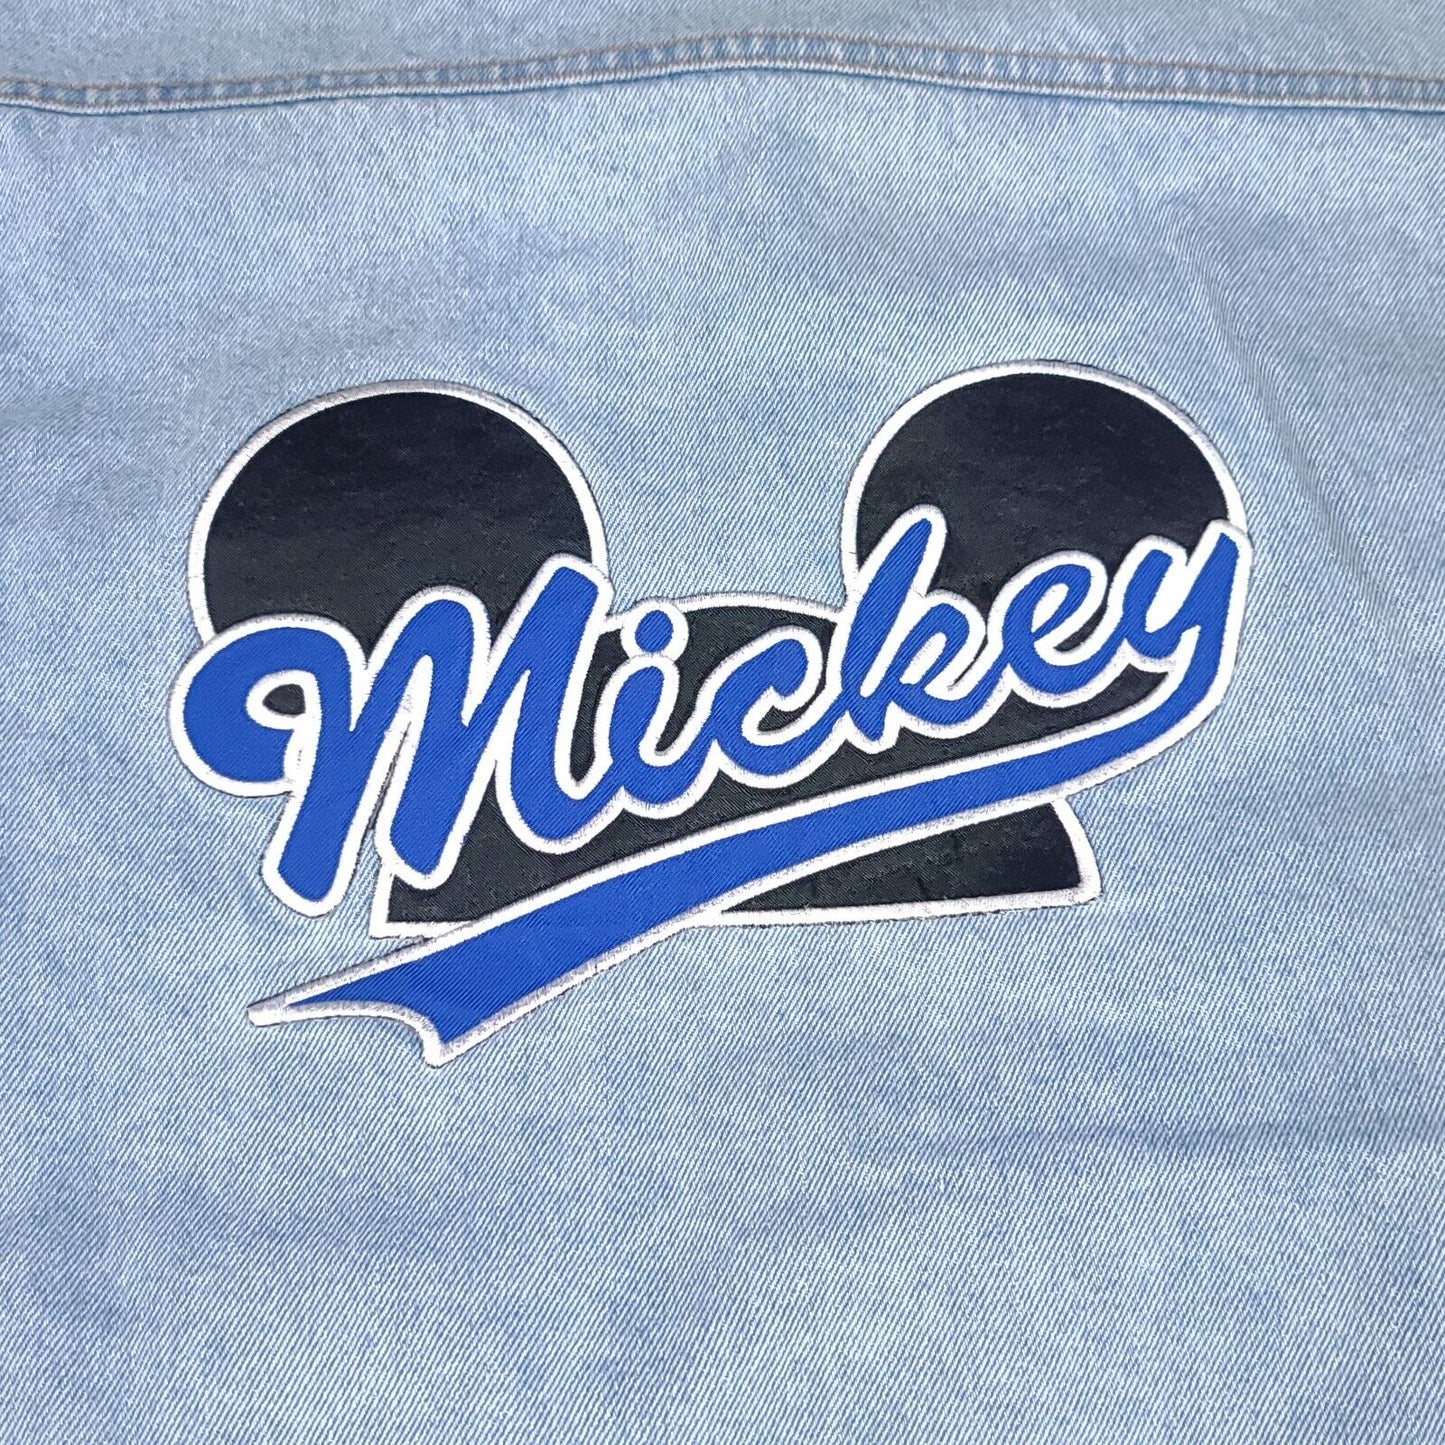 Disney Embroidered Mickey Mouse Denim Jean Jacket